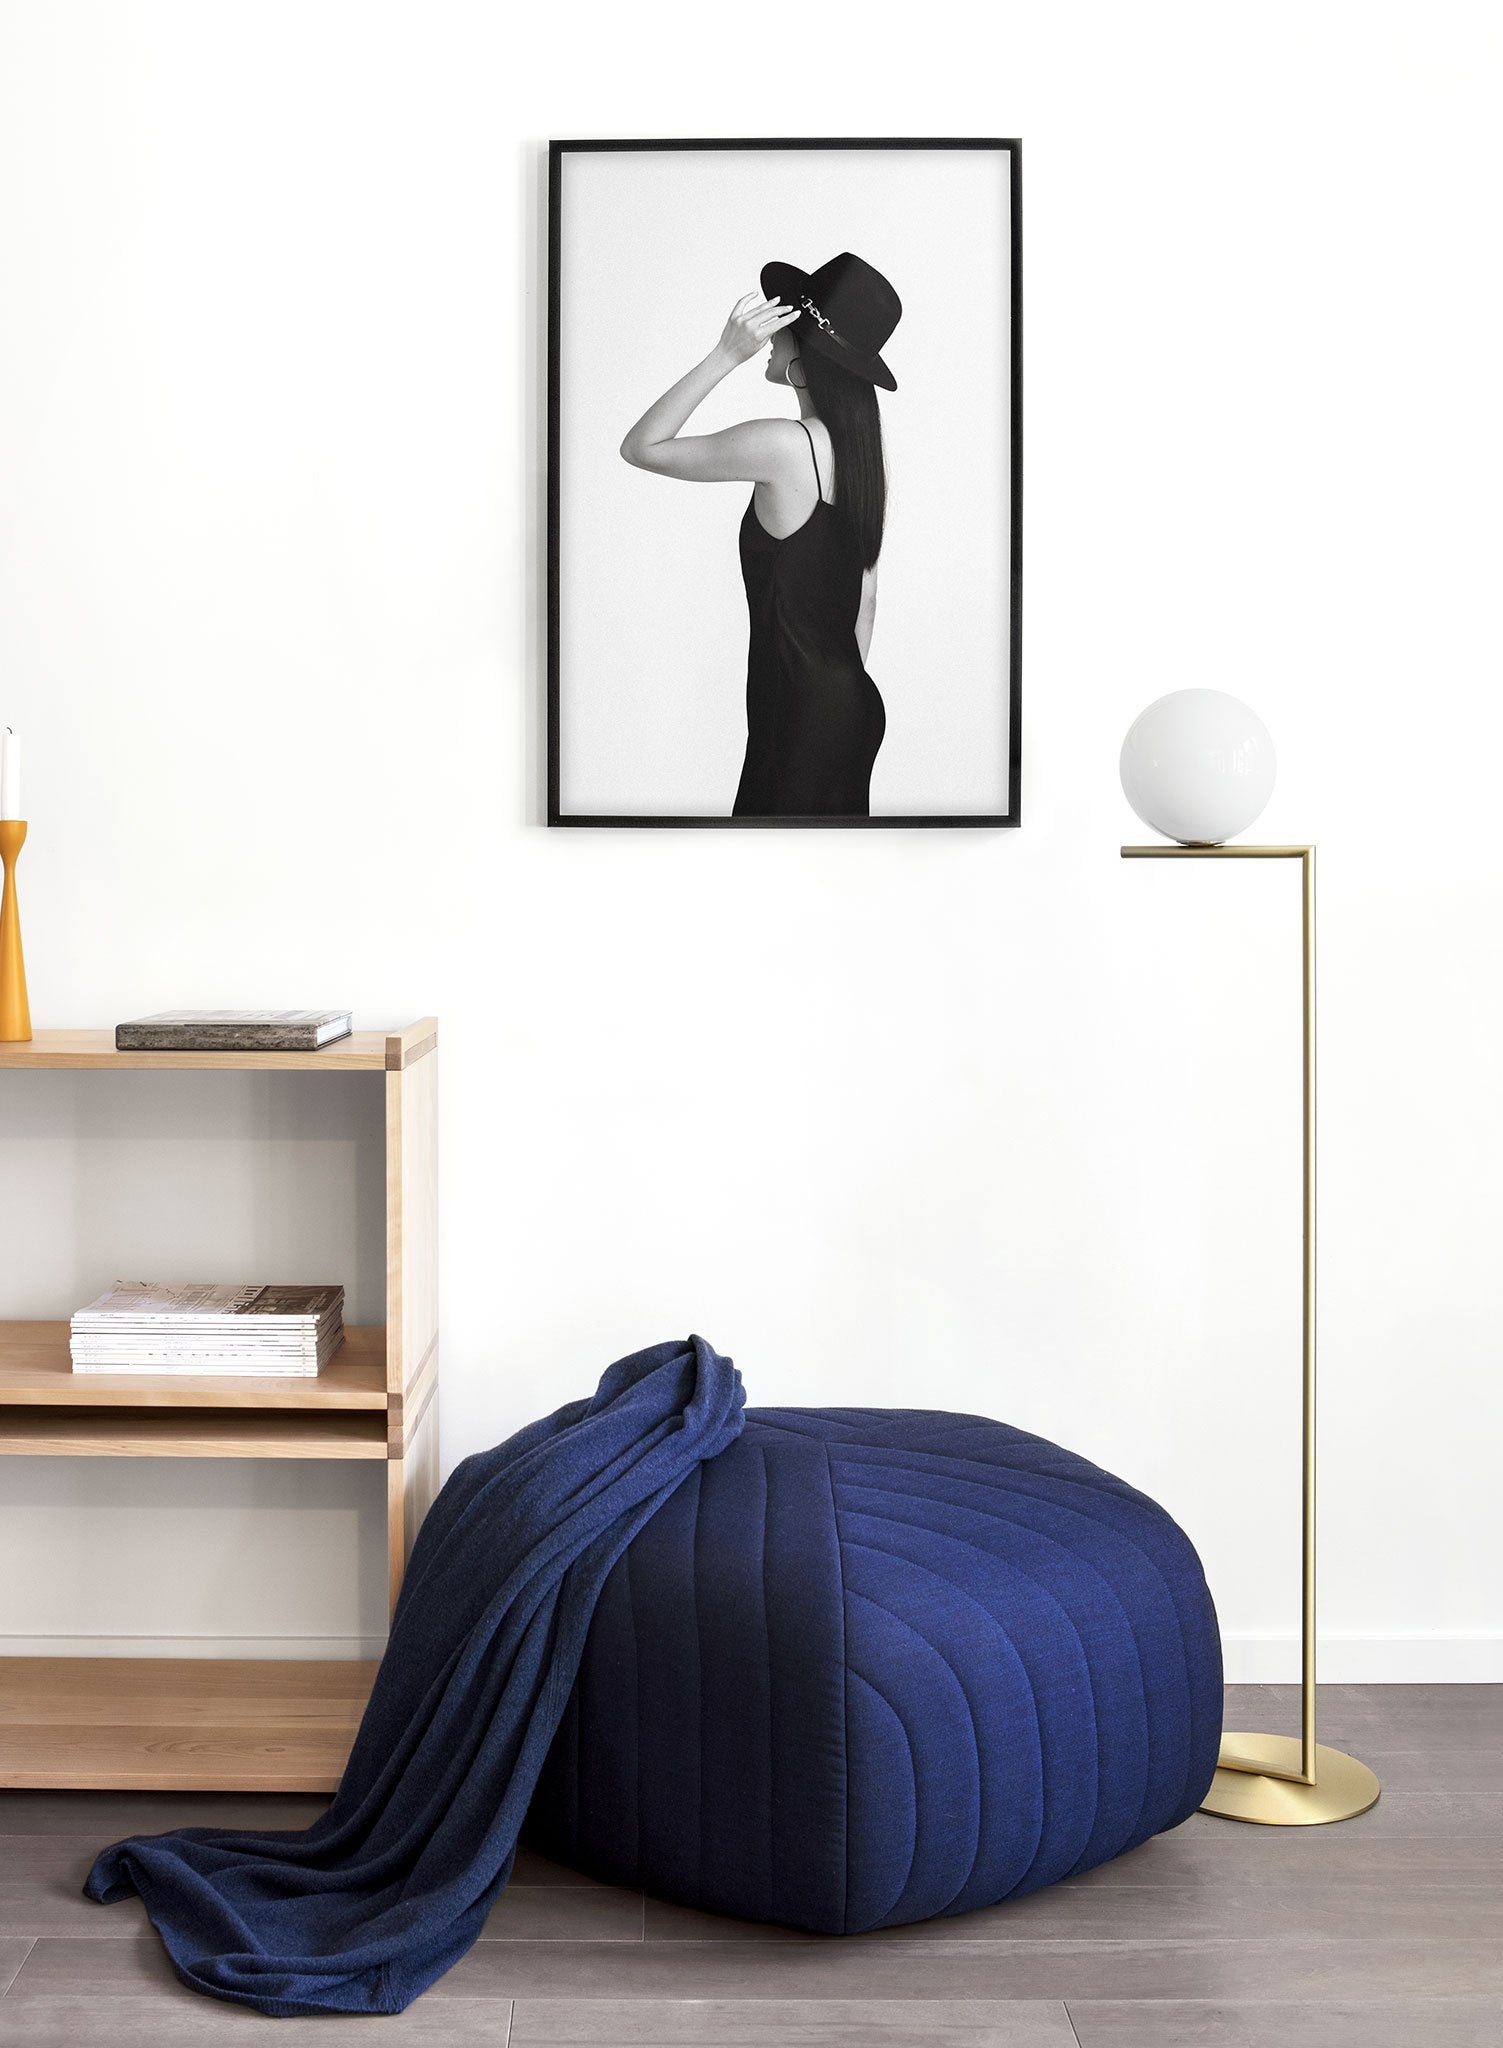 Black and white fashion photography poster by Opposite Wall with woman in fashionable outfit - Lifestyle - Living Room